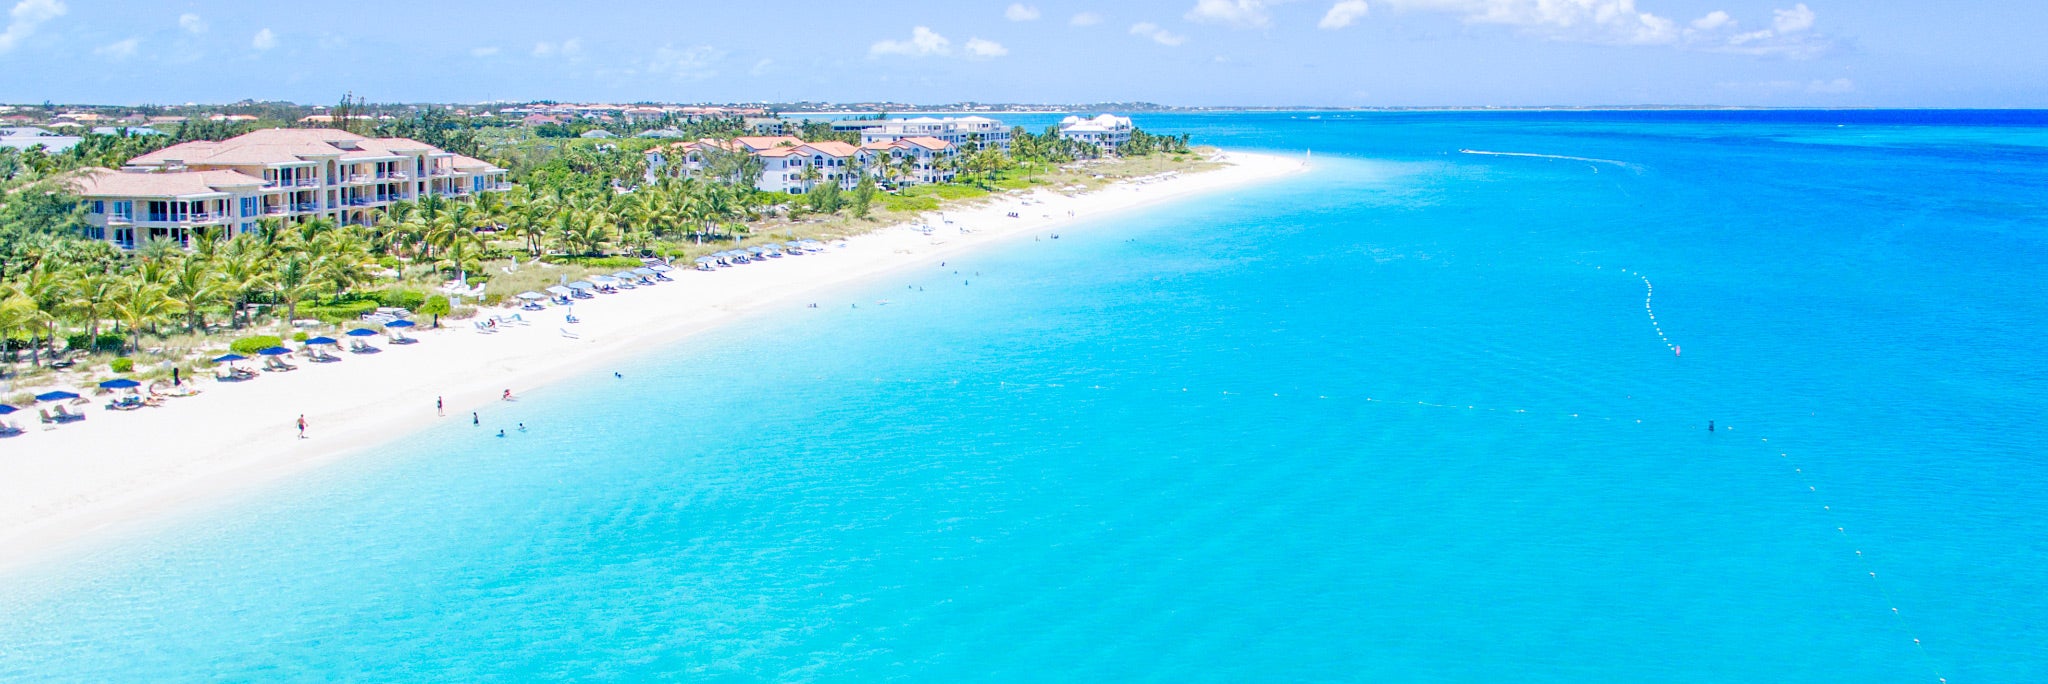 Invest Turks and Caicos